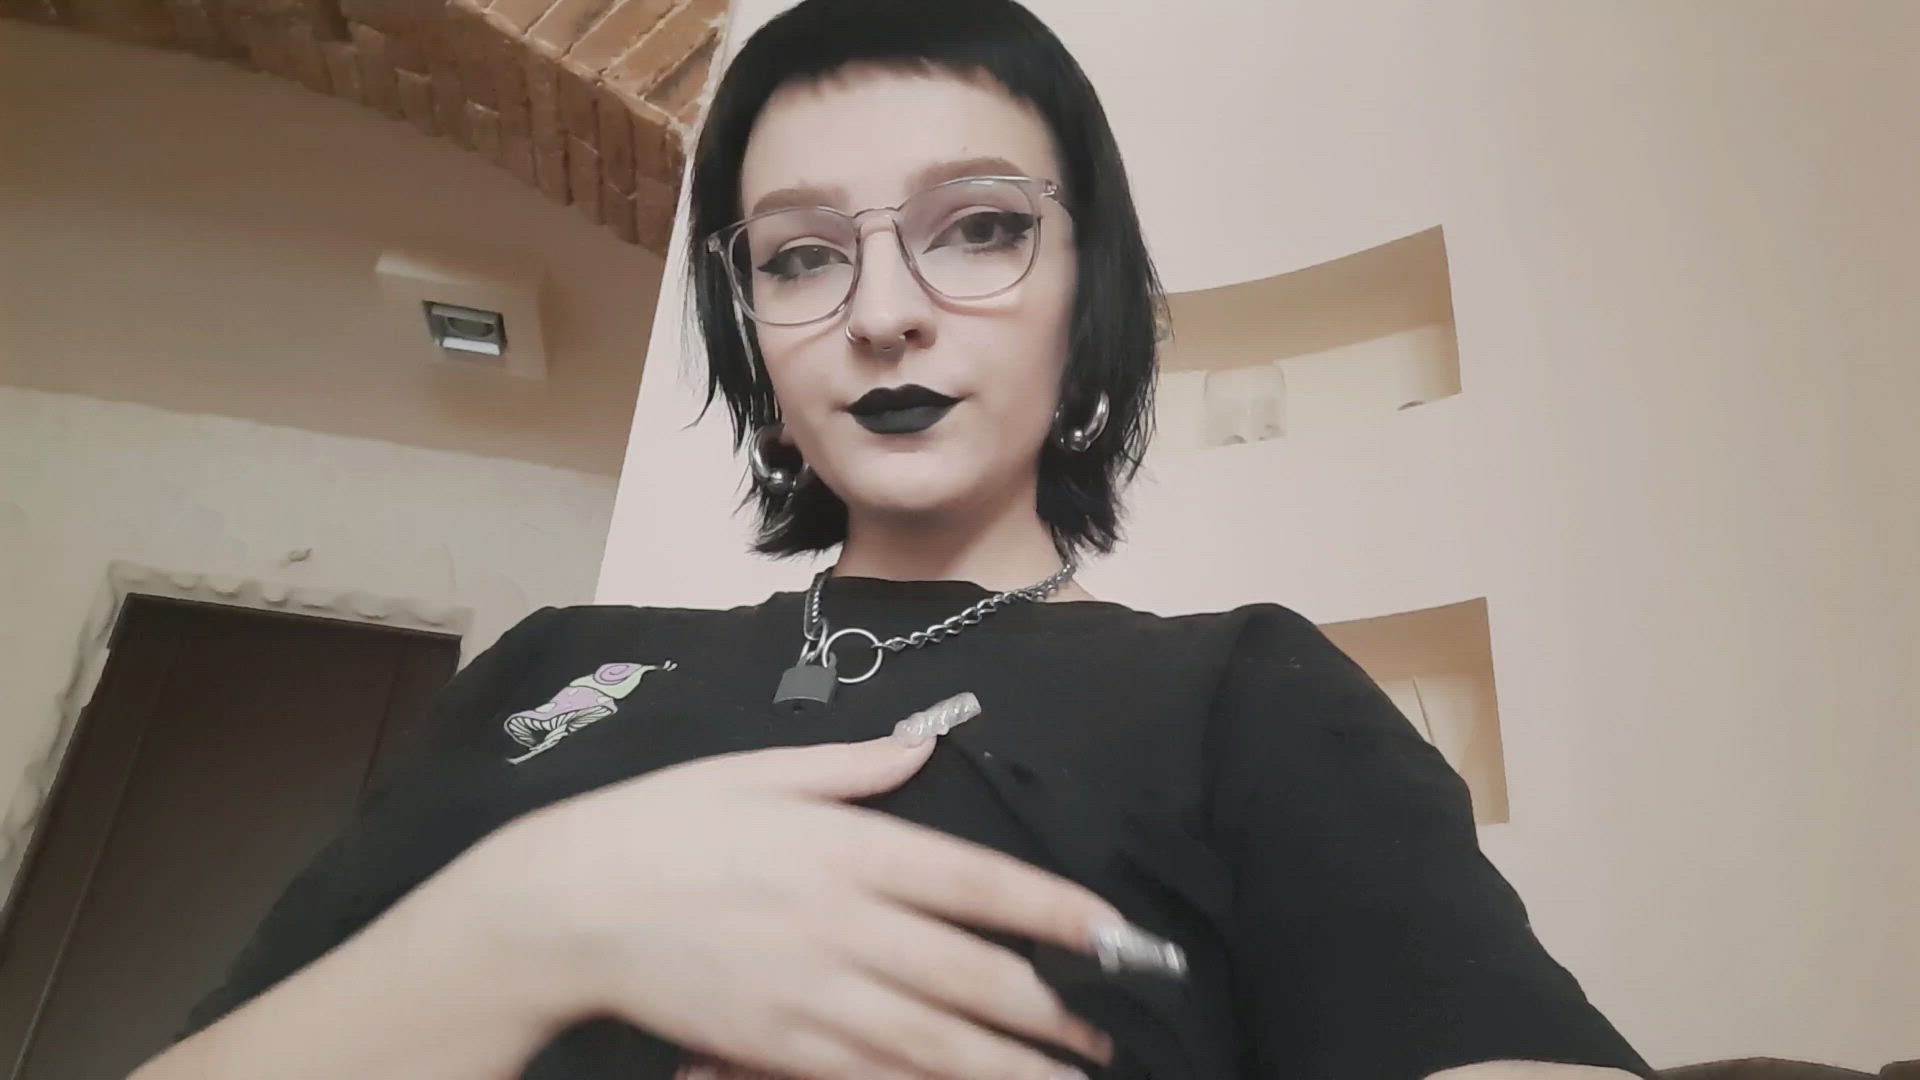 Big Tits porn video with onlyfans model darkhoromi <strong>@darkhoromi</strong>